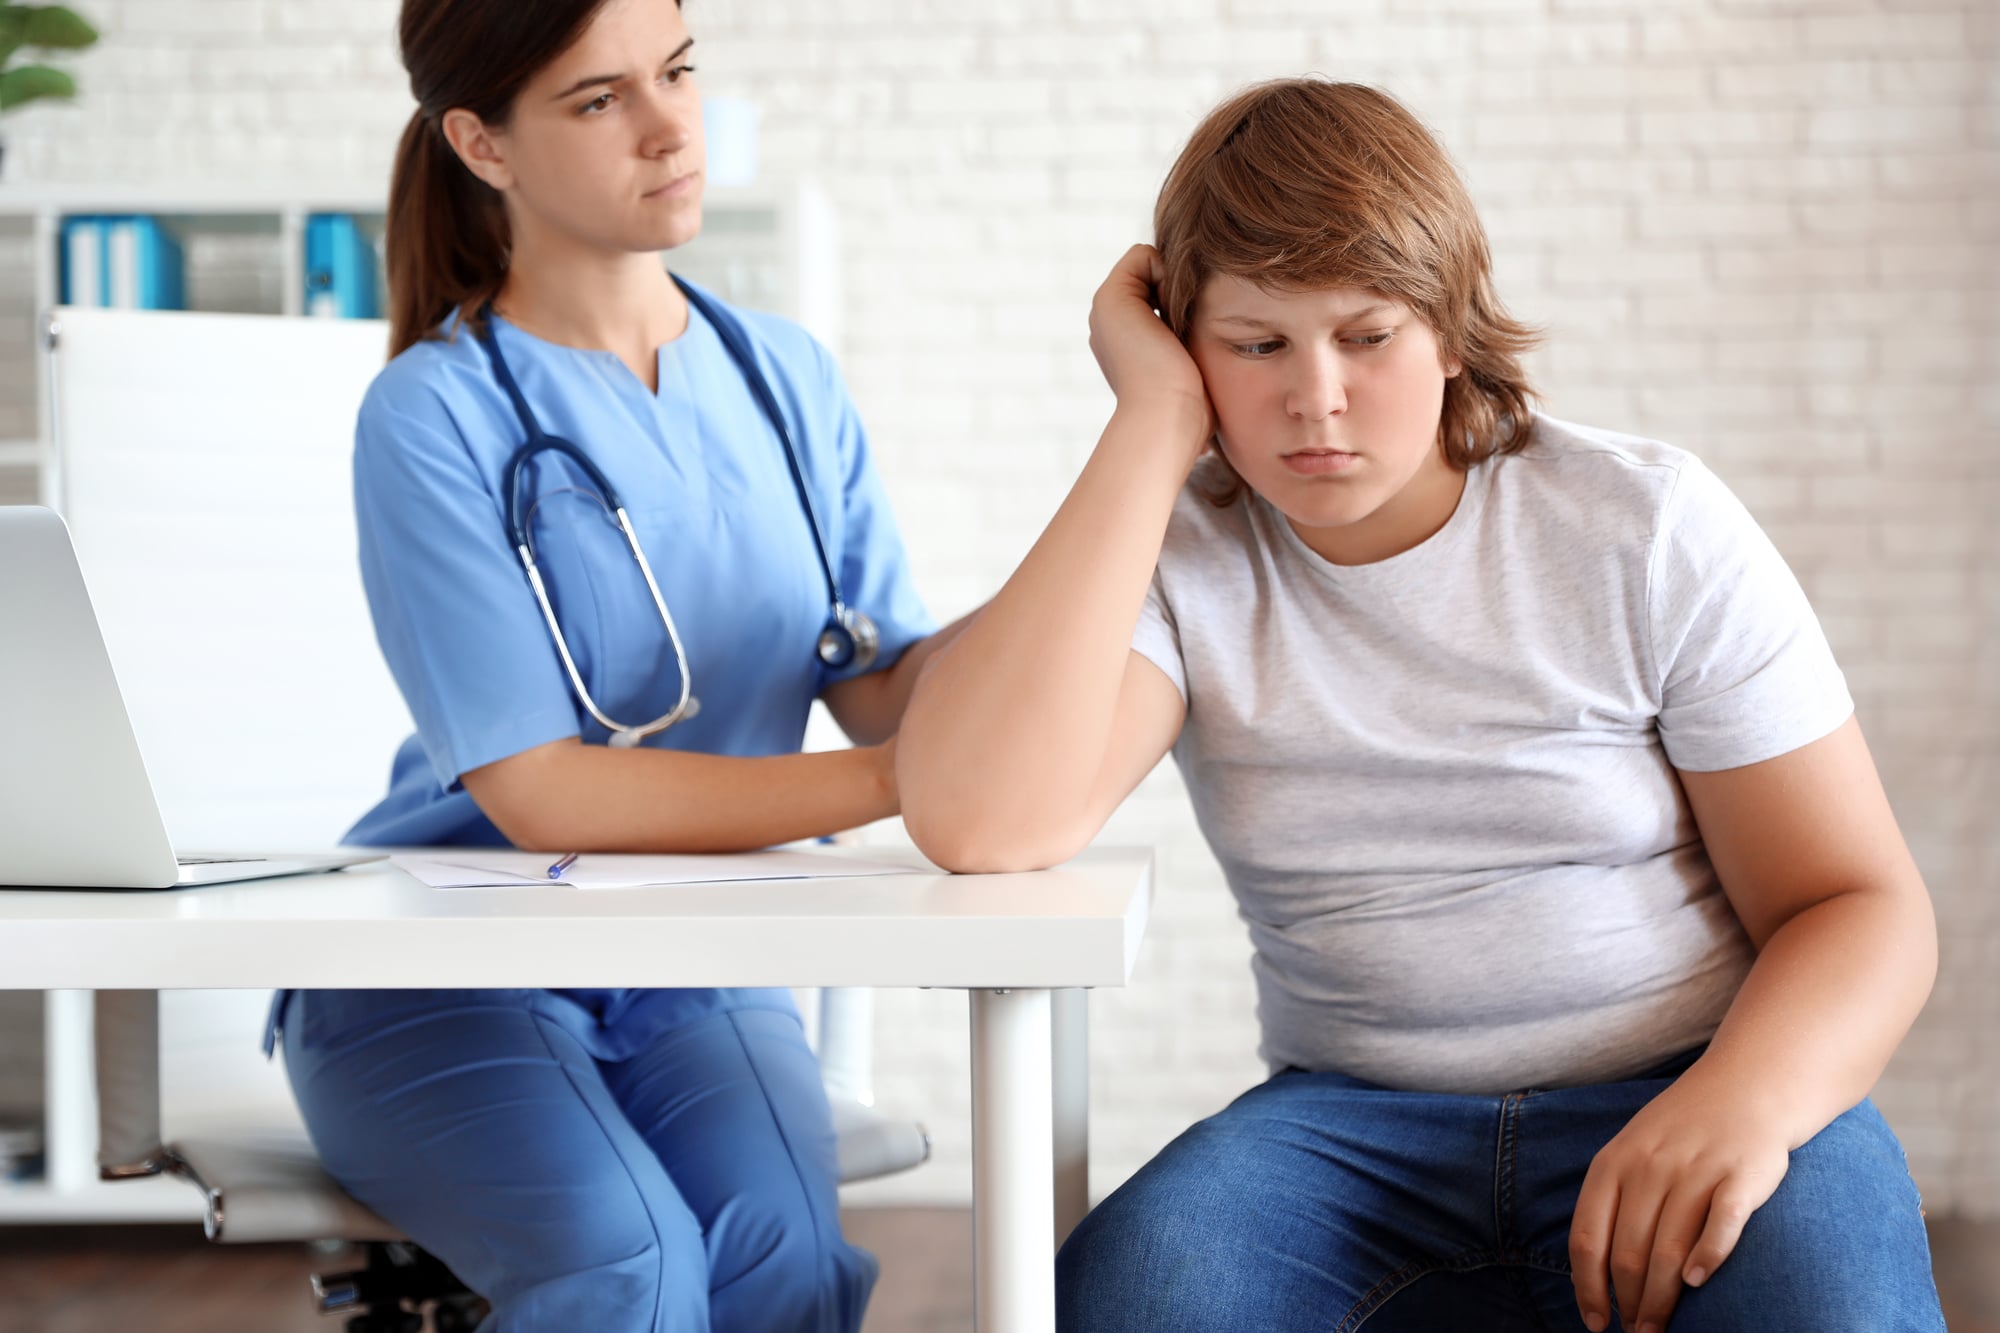 Obese teenage child pouting next to a woman doctor in a doctor's office.